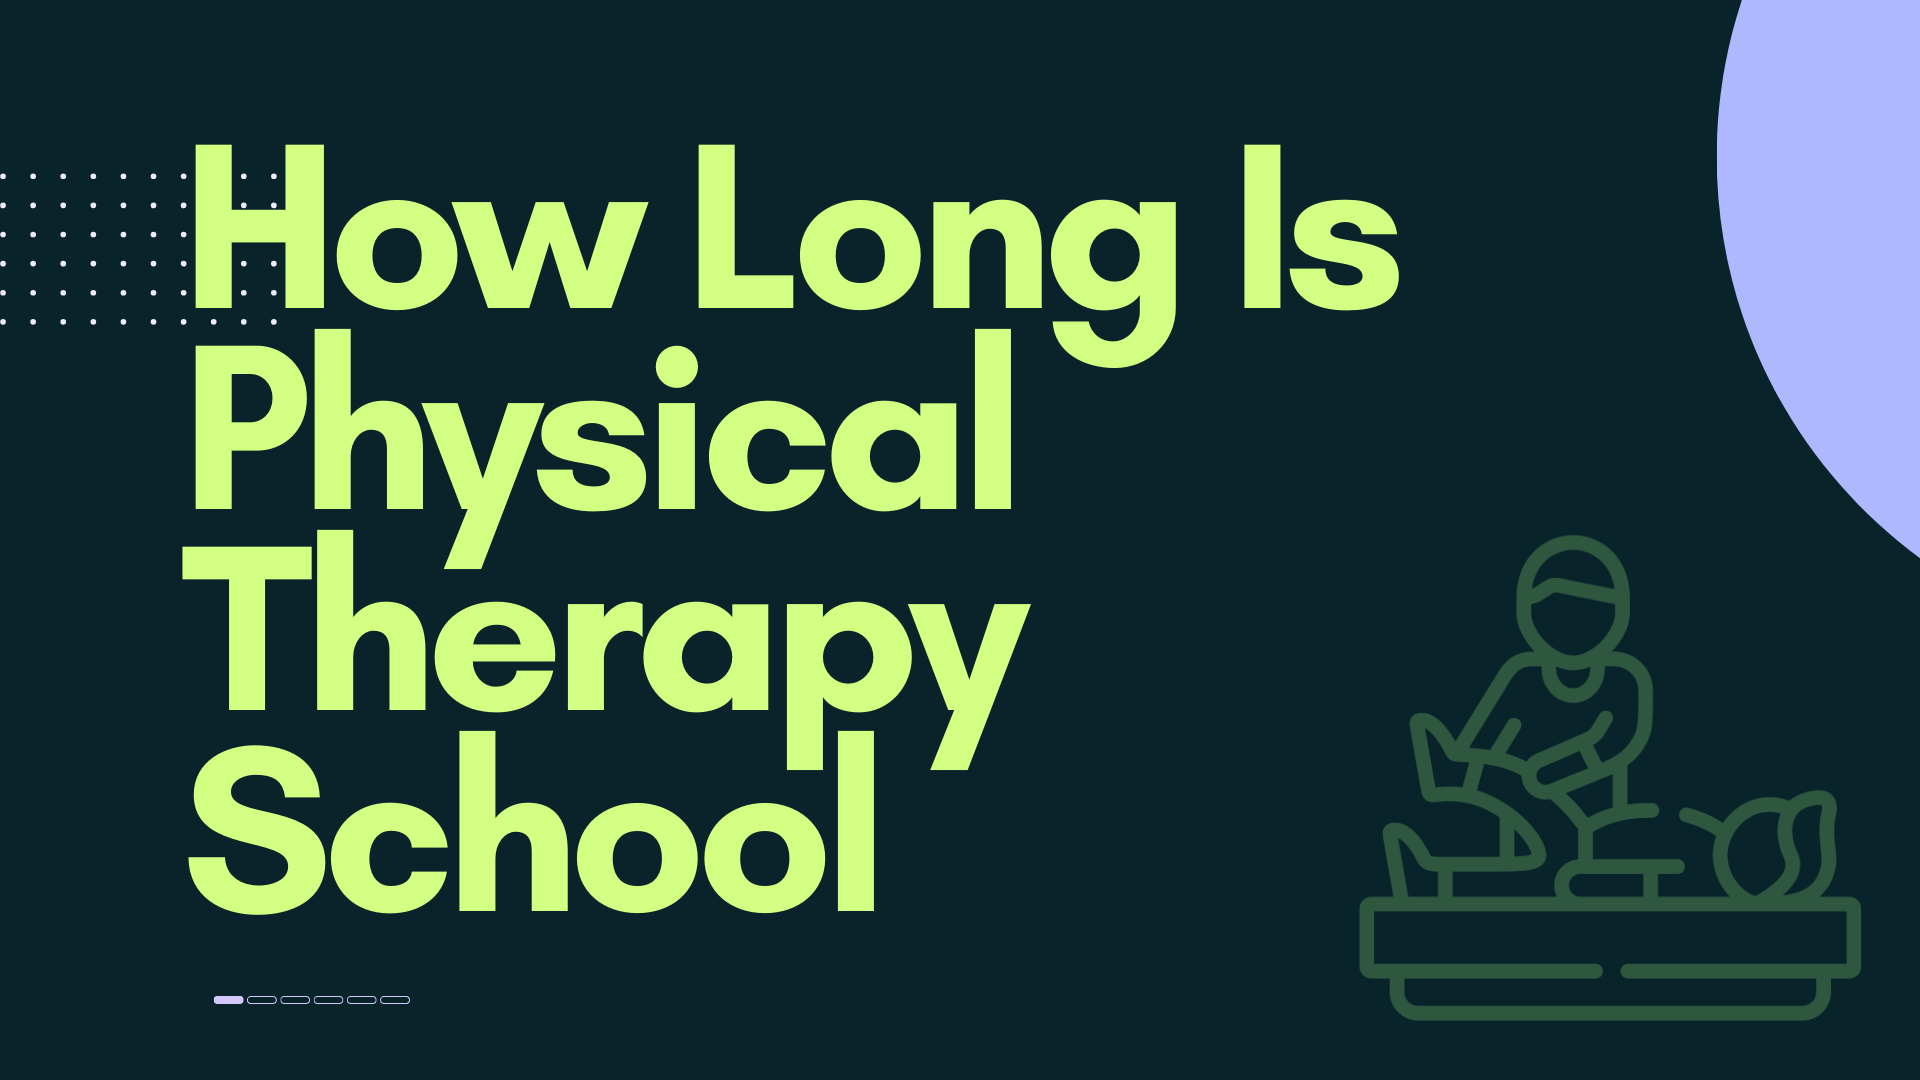 How Long Is Physical Therapy School 1 